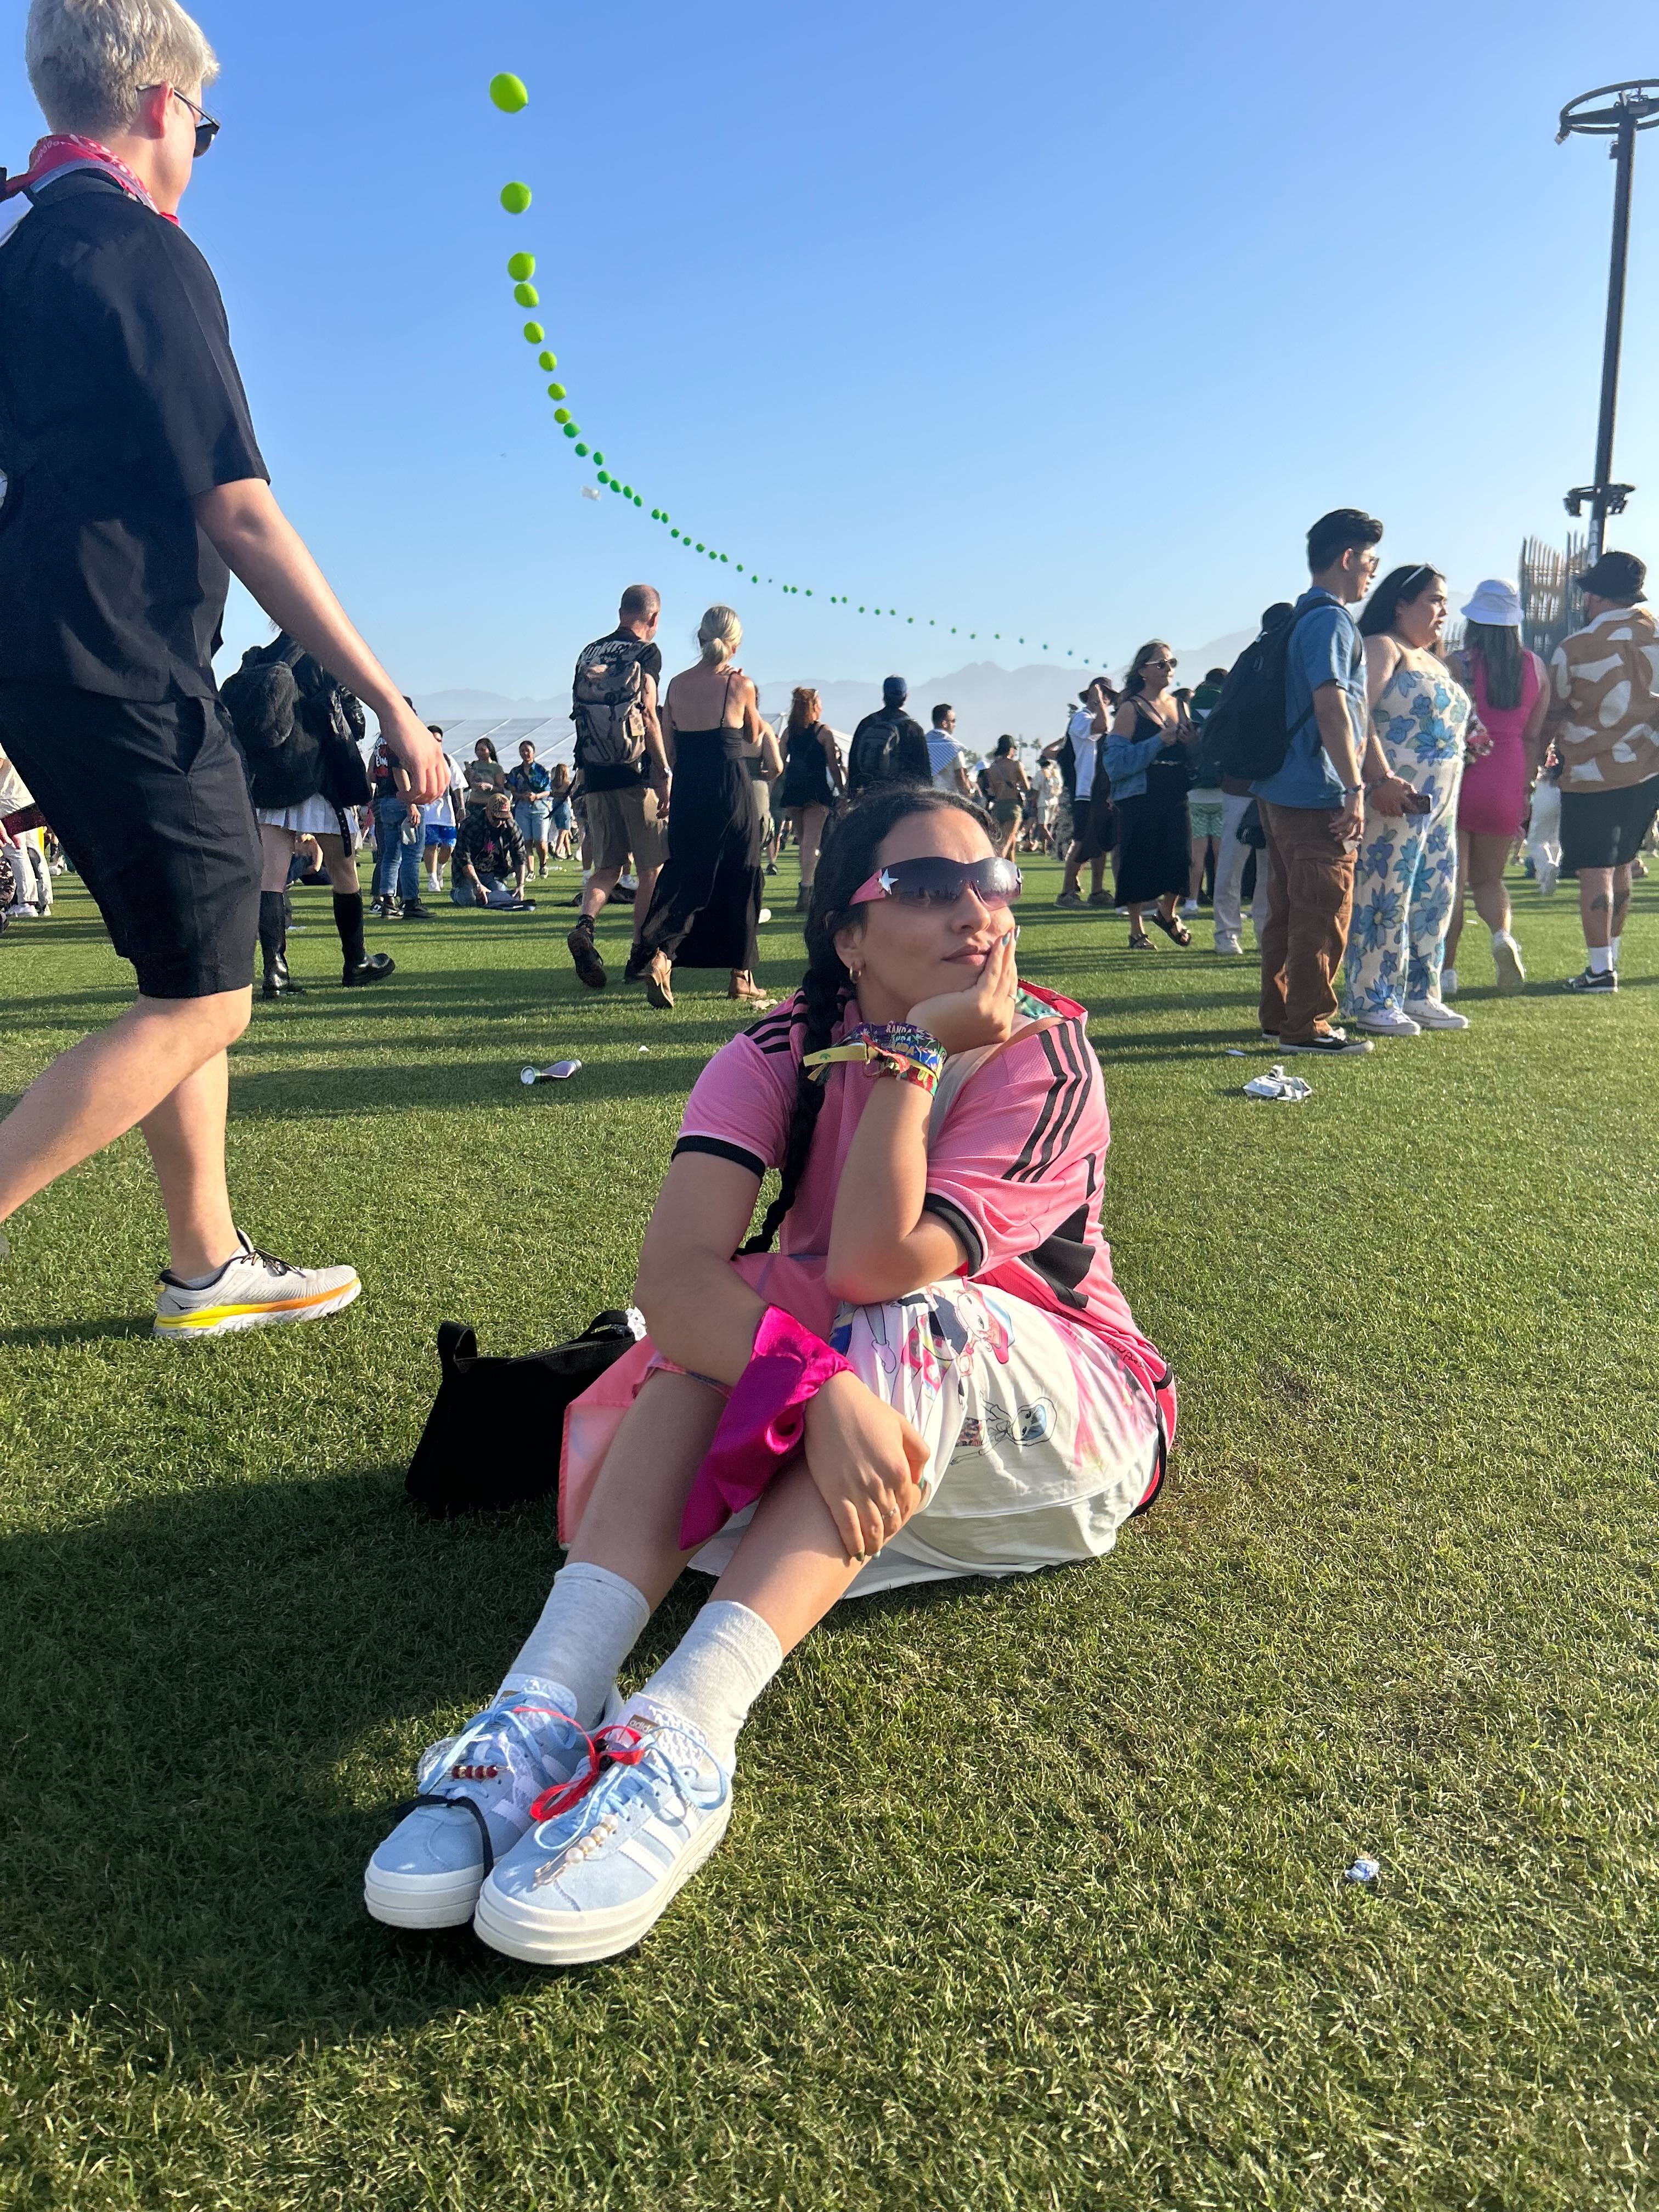 Influencer at Coachella wearing pink jersey, white midi skirt, and custom Adidas sneakers with ribbons.